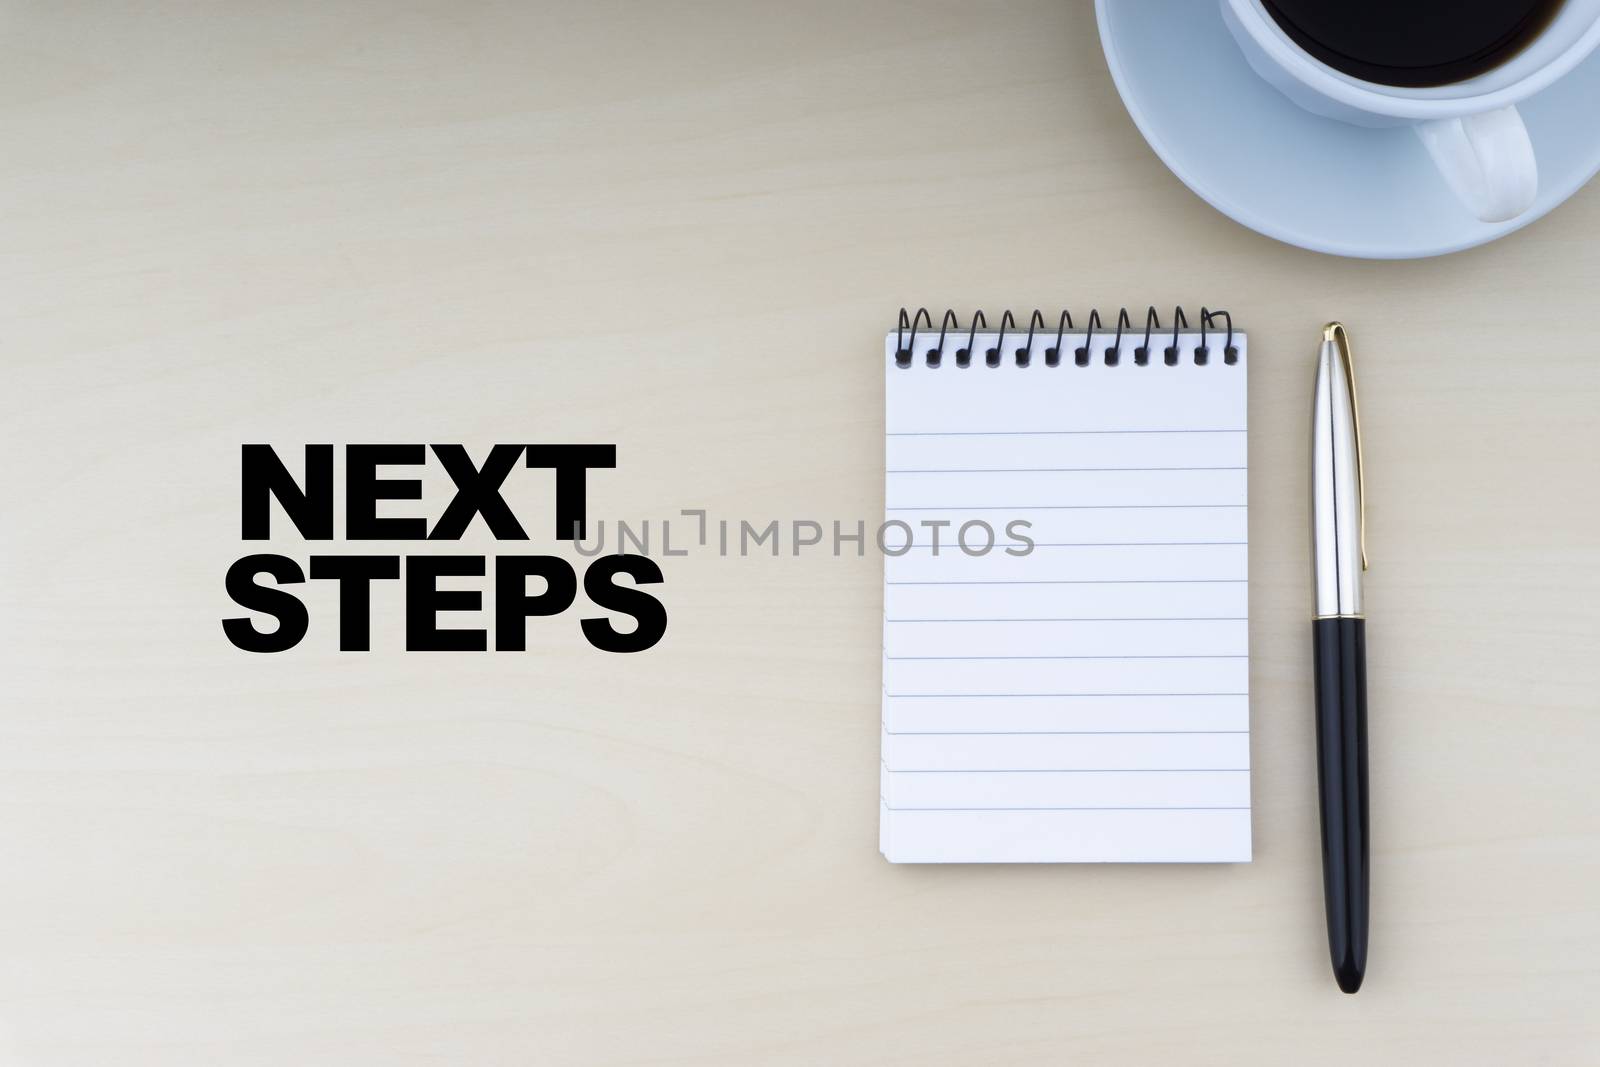 NEXT STEPS text with fountain pen and cup of coffee on wooden background by silverwings